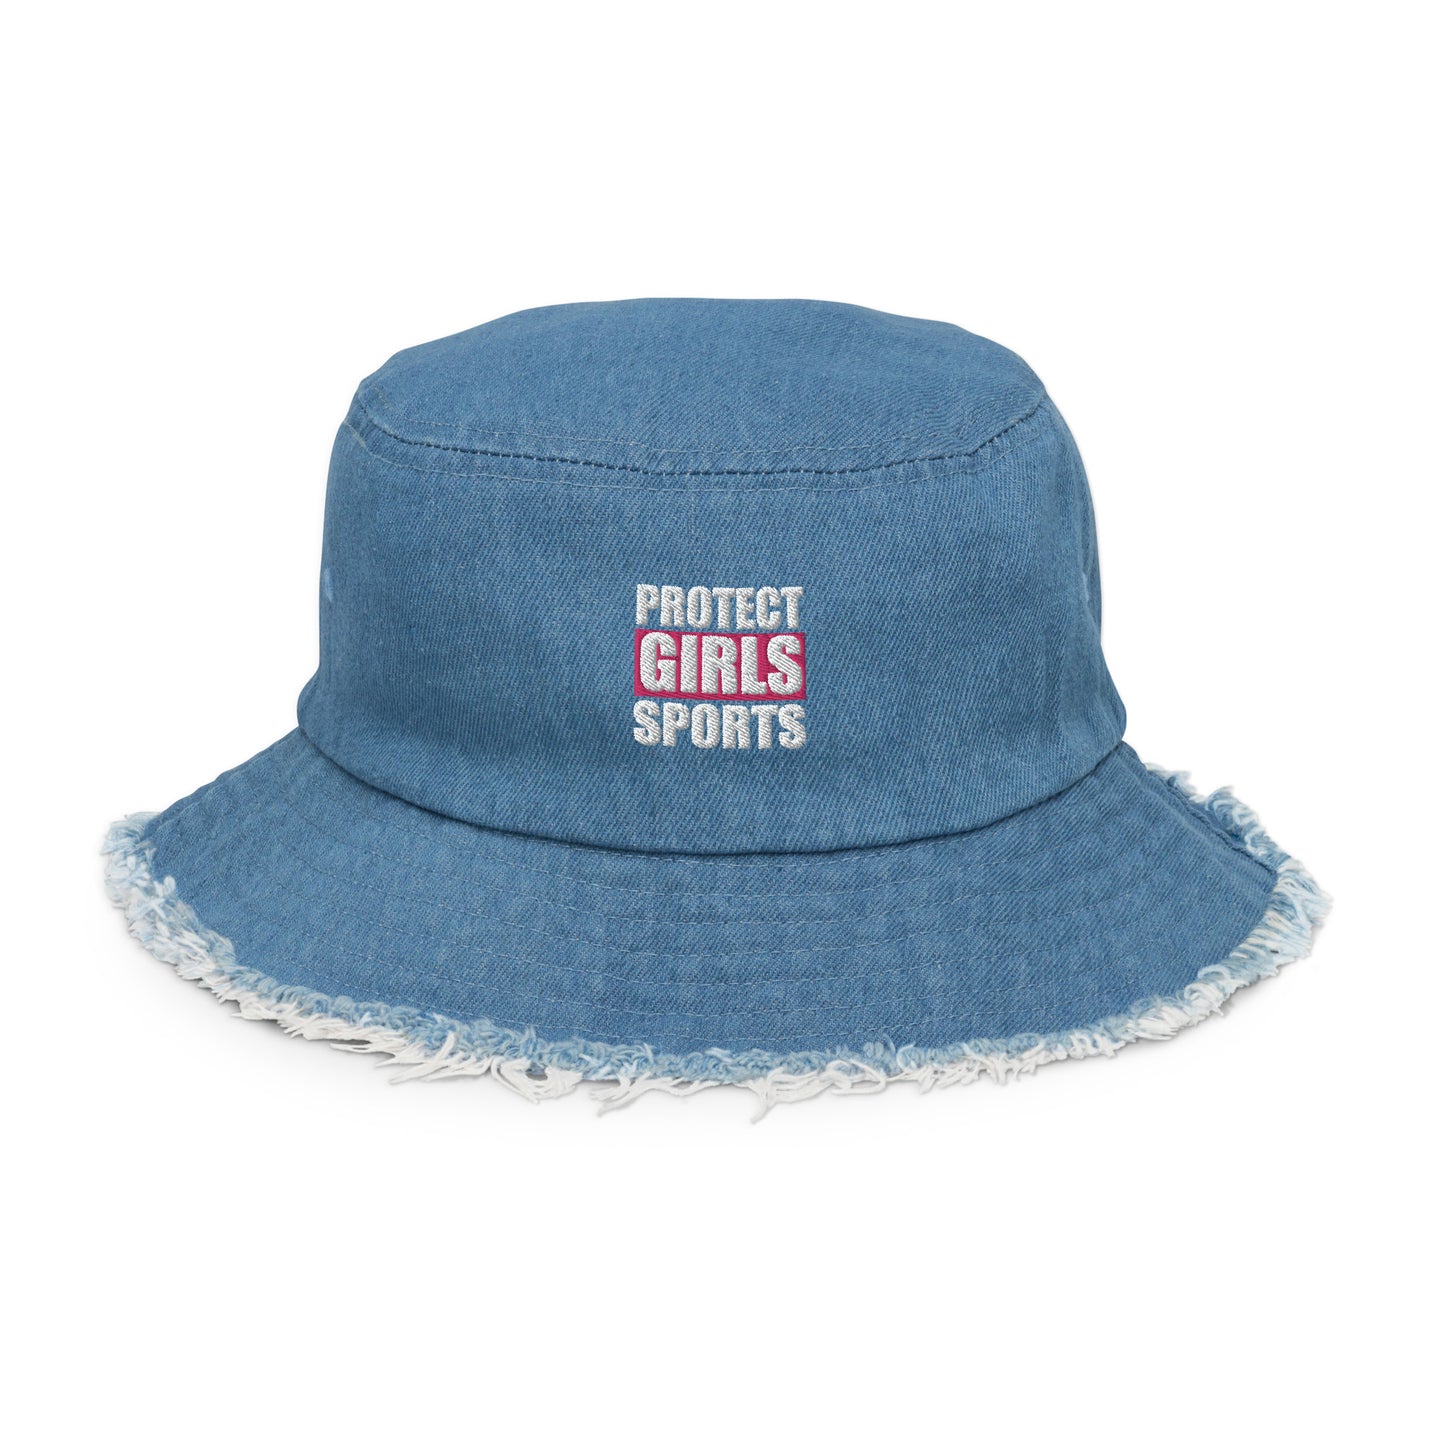 Protect Girls Sports Embroidered Bucket Hat